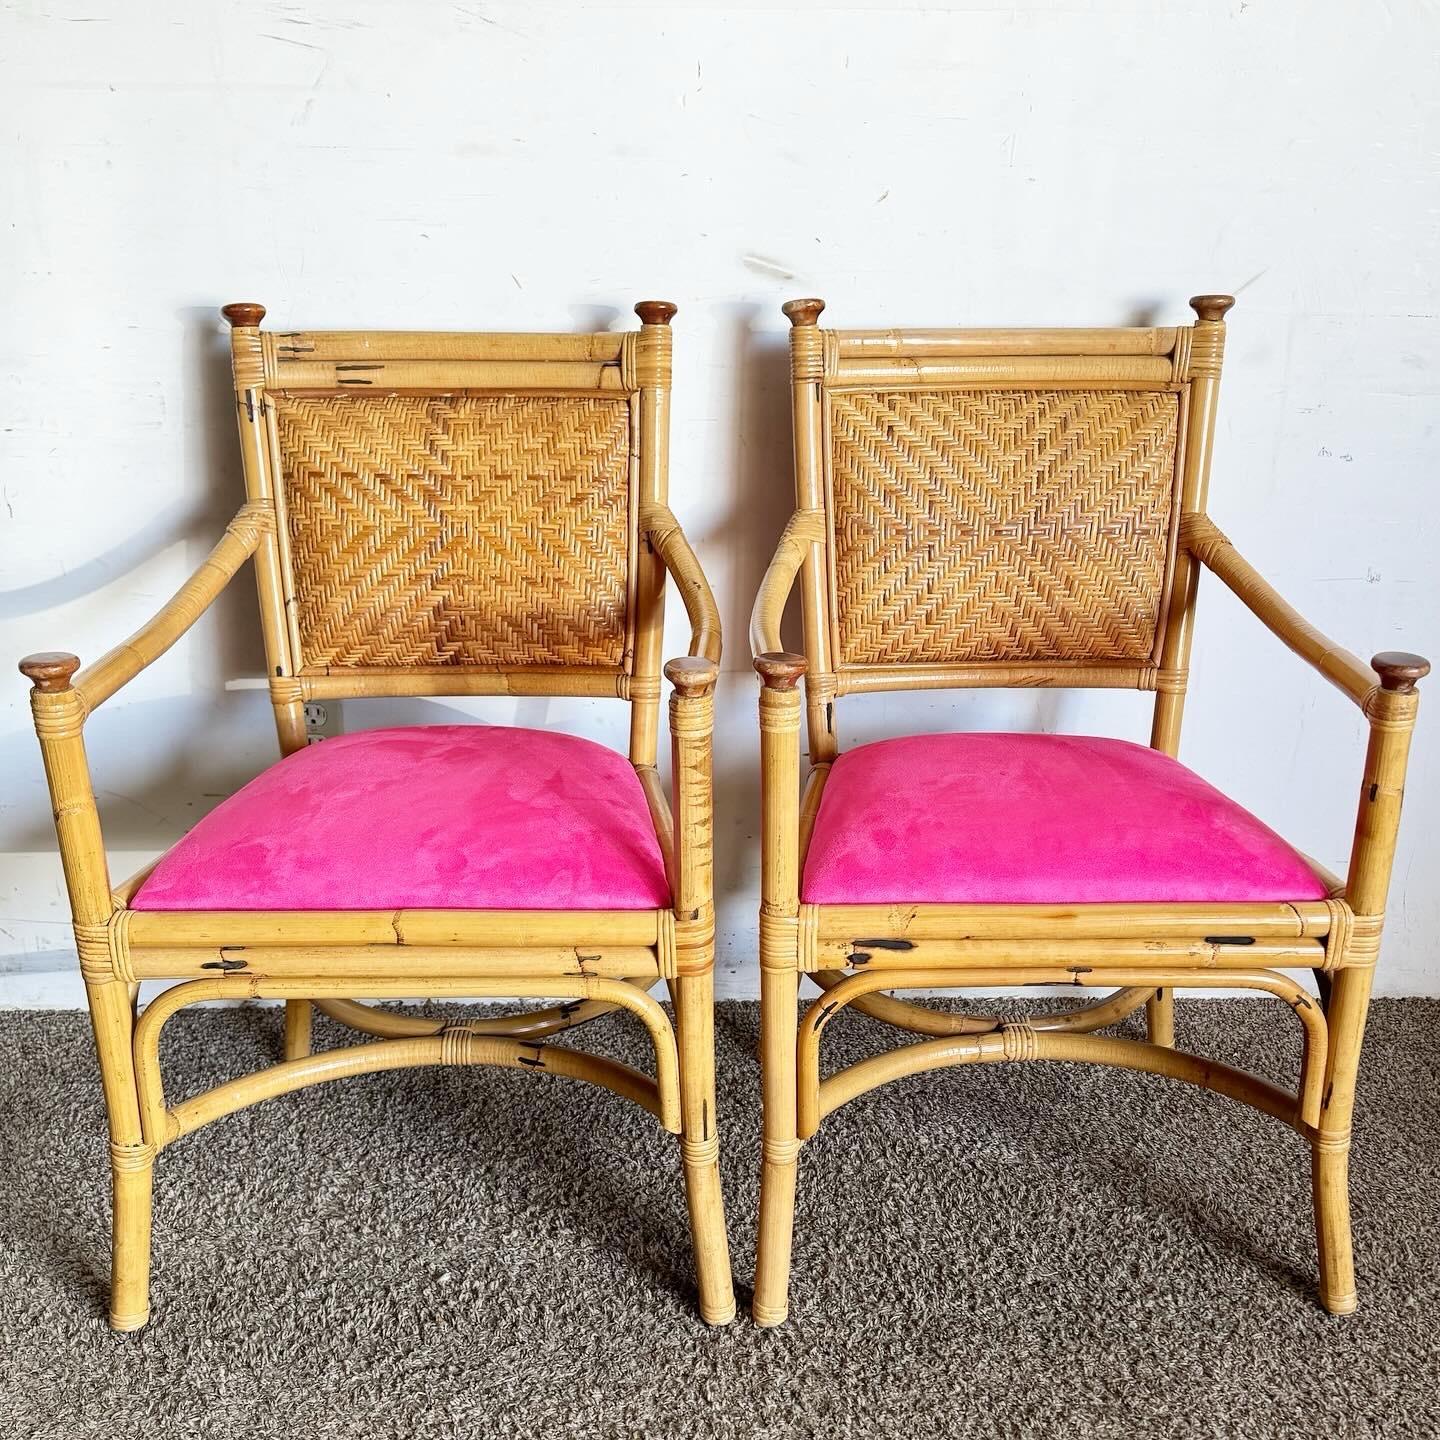 Philippine Boho Chic Wicker Rattan Bamboo Dining Arm Chairs With Hot Pink Cushions For Sale